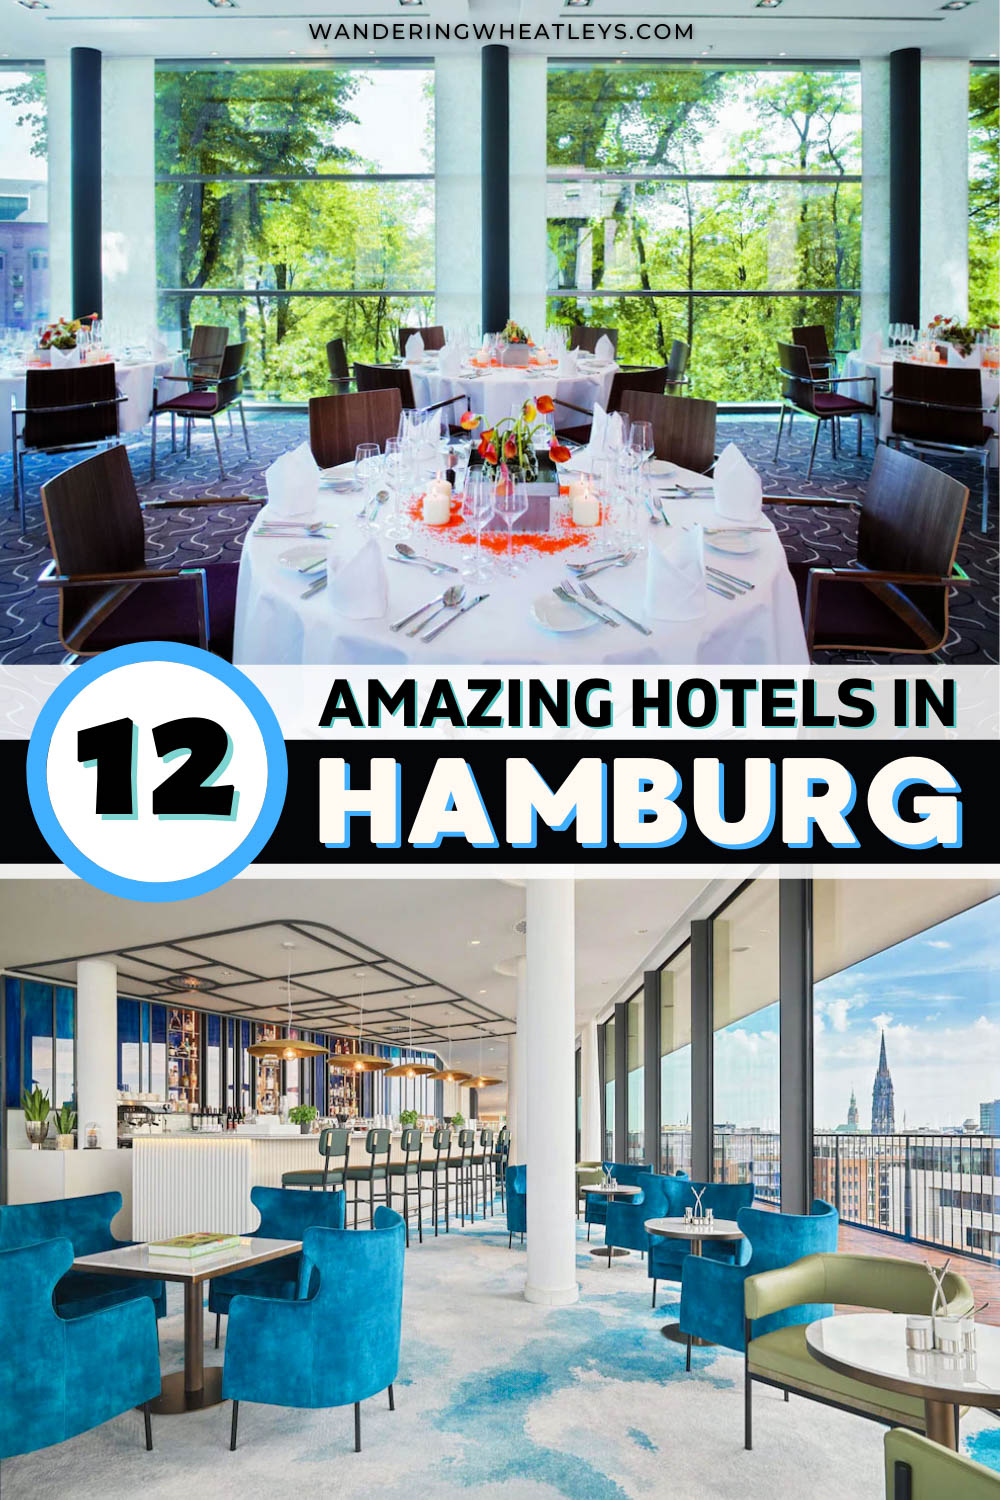 The Best Hotels in Hamburg, Germany